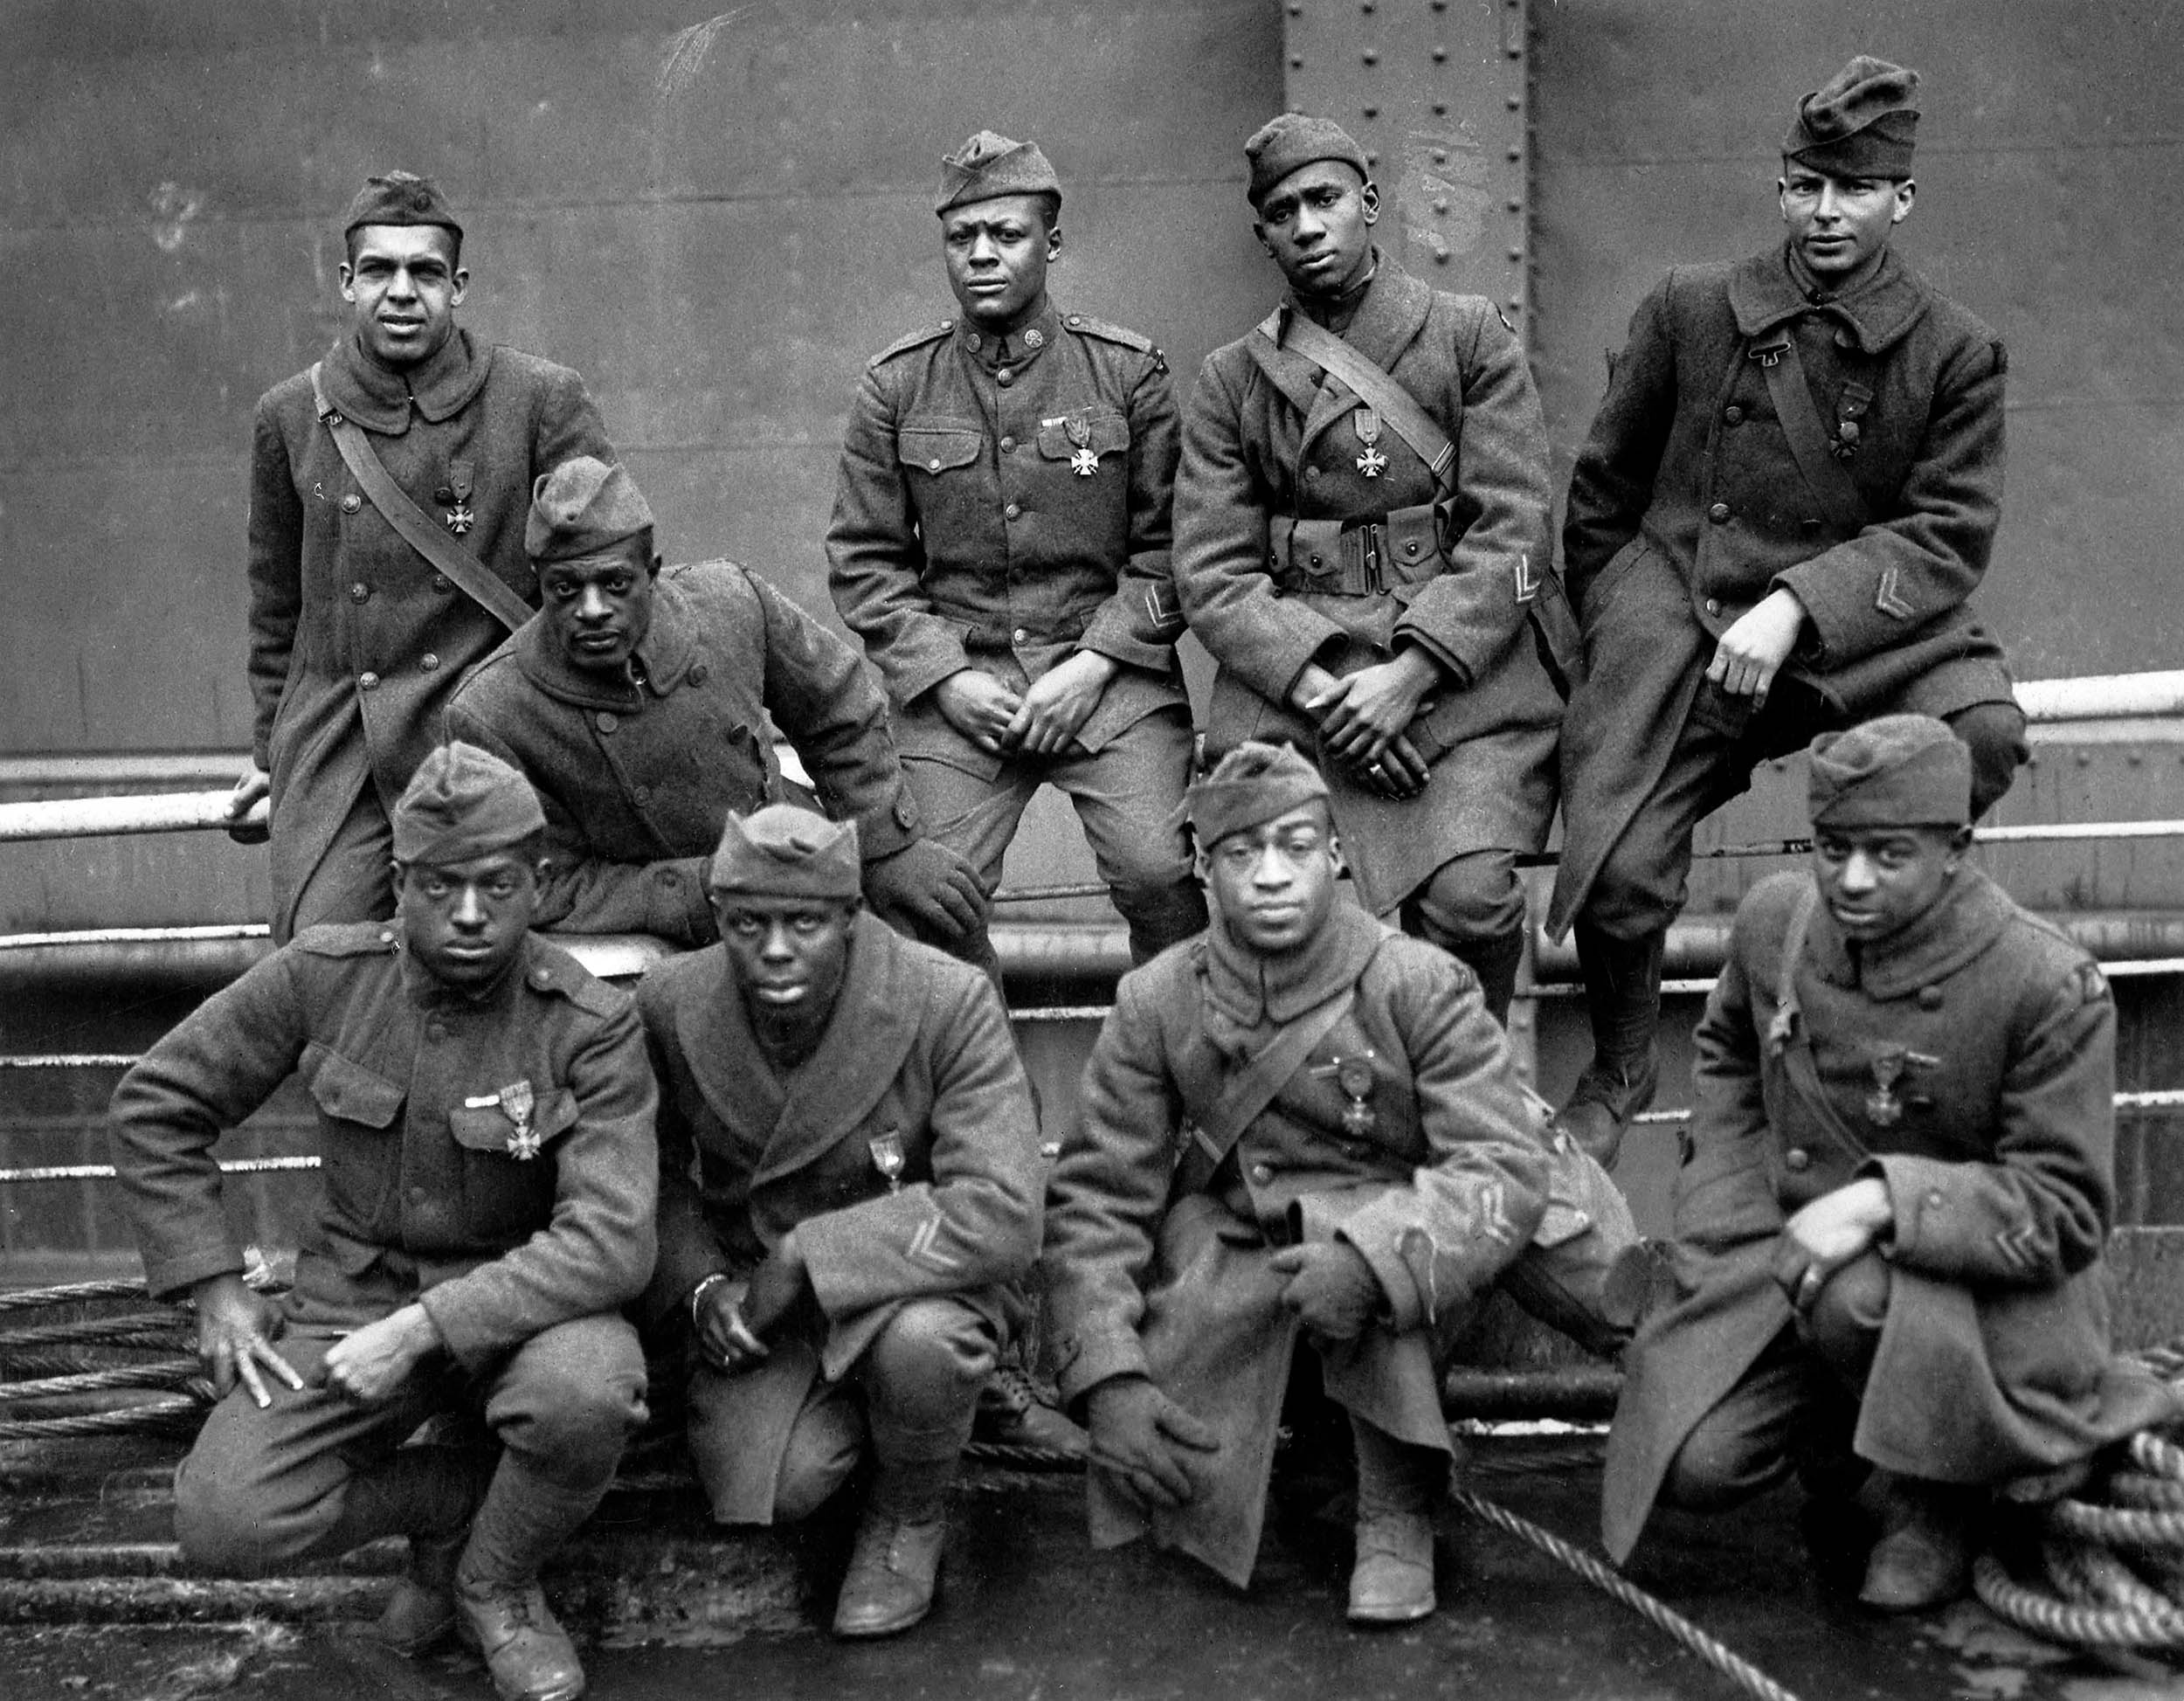 On USS Stockholm, nine Soldiers of 369th Infantry Regiment, awarded French government’s Croix de Guerre for gallantry in action, pose for photo while awaiting disembarkation in New York City, February 12, 1919; left to right, front row, Private Ed Williams, Private Herbert Taylor, Private Leon E. Fraiter, Private Ralph Hawkins; back row, Sergeant Henry David Primas, Sr., Sergeant Daniel W. Storms, Jr., Private Joe Williams, Private Alfred S. Manley, and Corporal Tyler W. Taylor (U.S. National Archives and Records Administration)